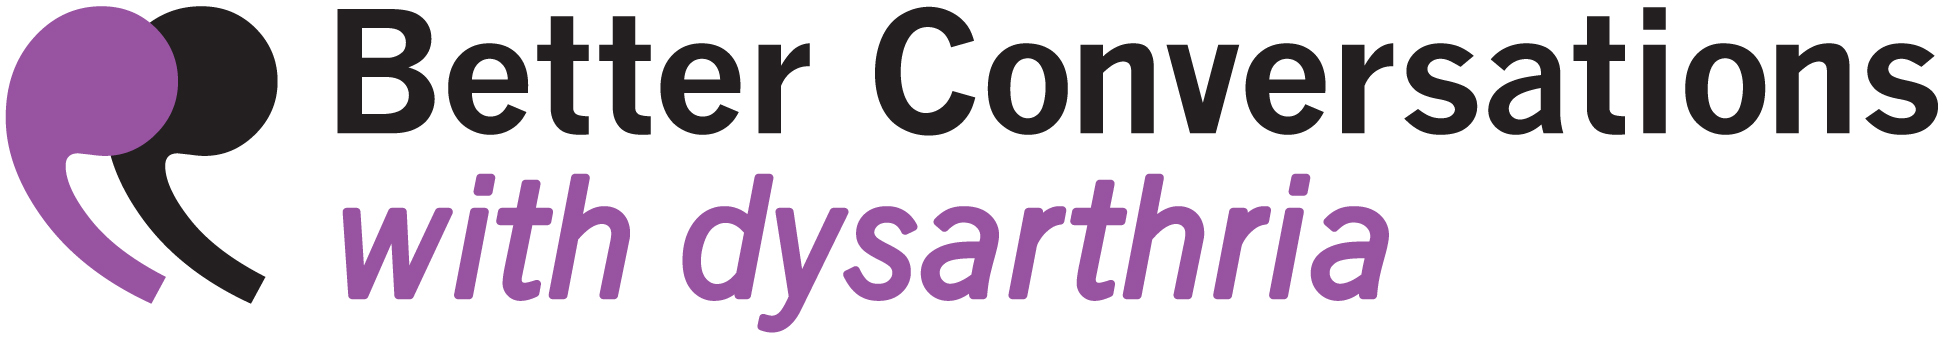 Logo image for better conversations with dysarthria